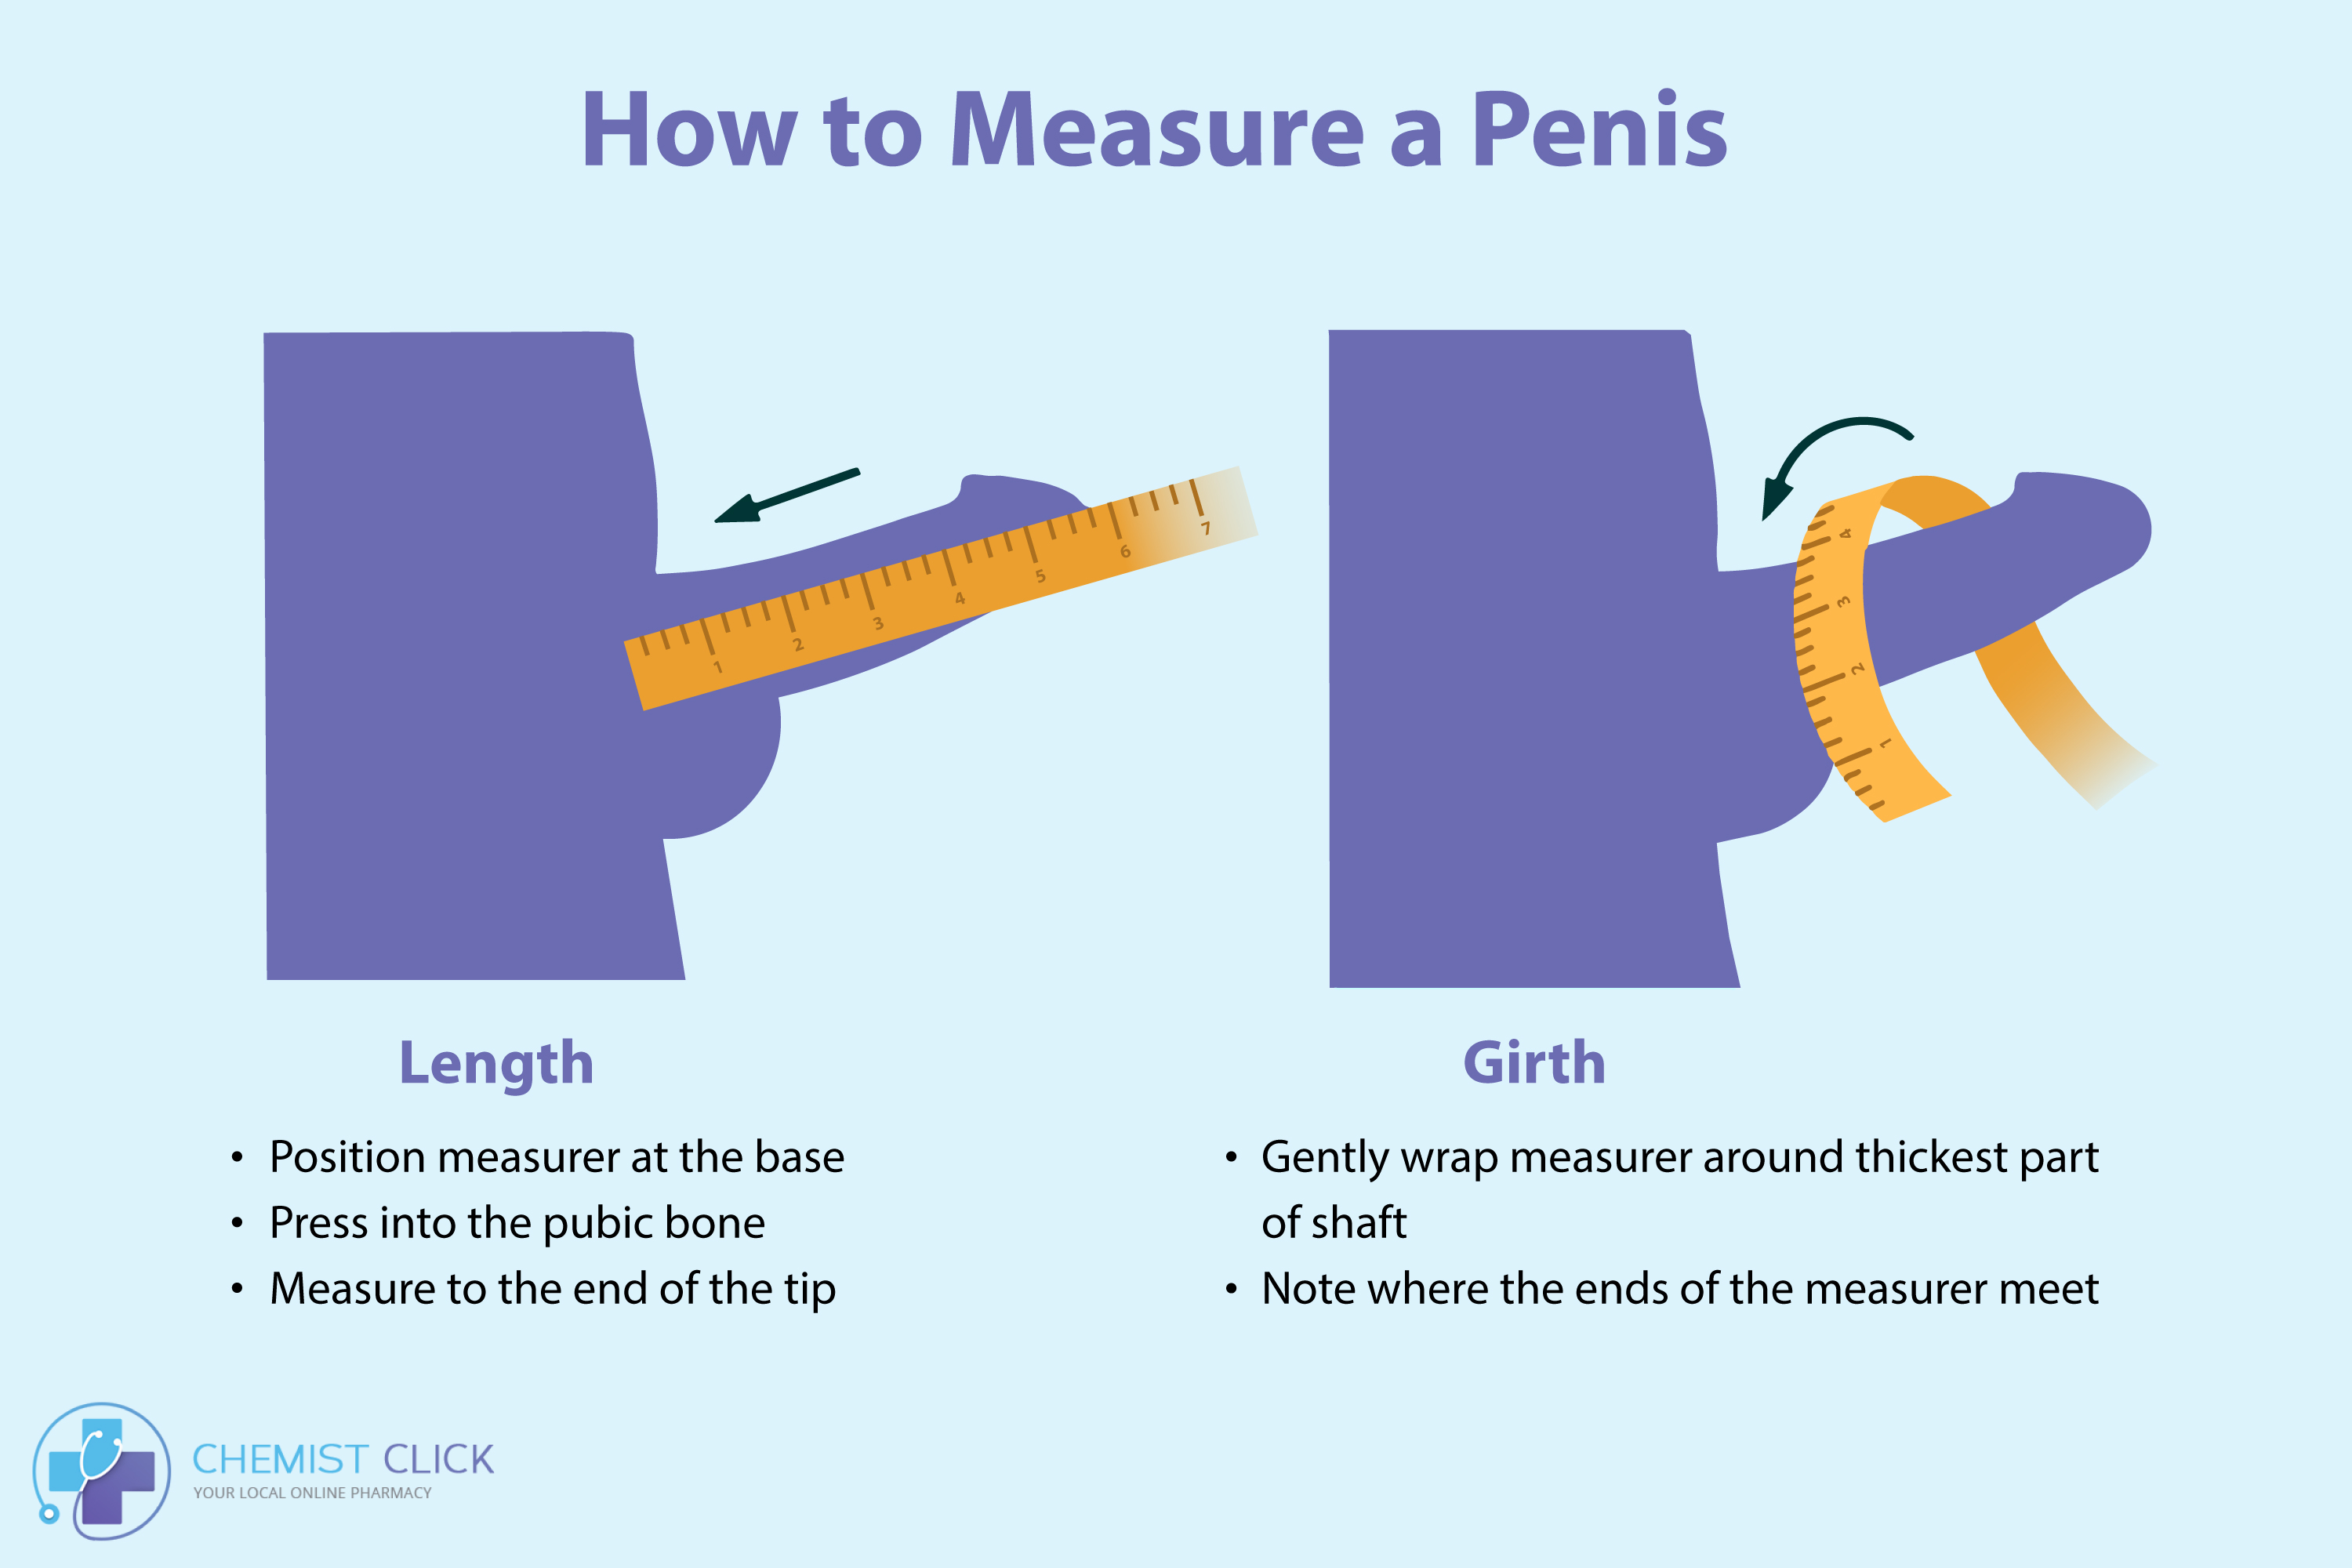 Average Penis Size According to Science